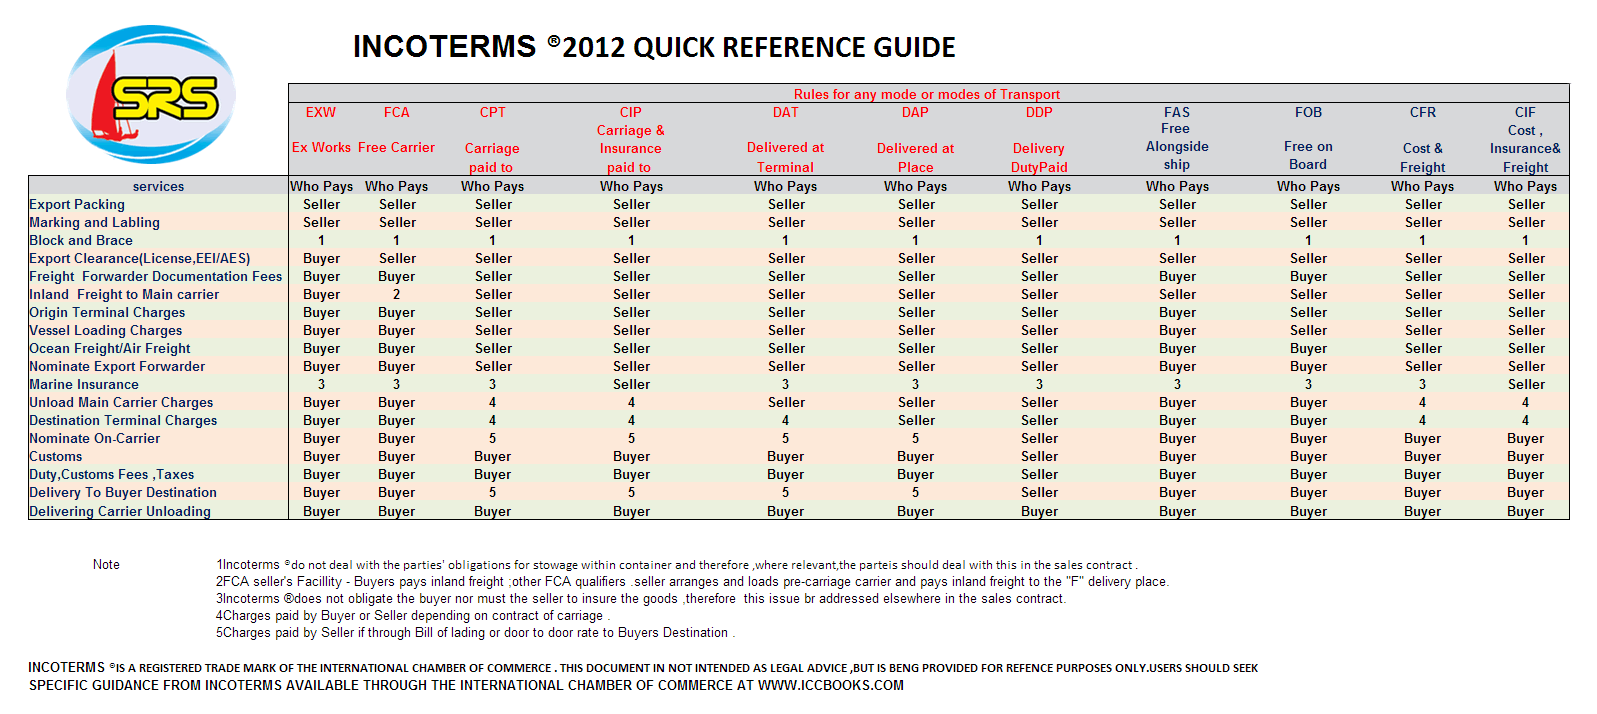 Incoterms Guide INCOTERMS 2012 QUICK REFERENCE GUIDE Shipping